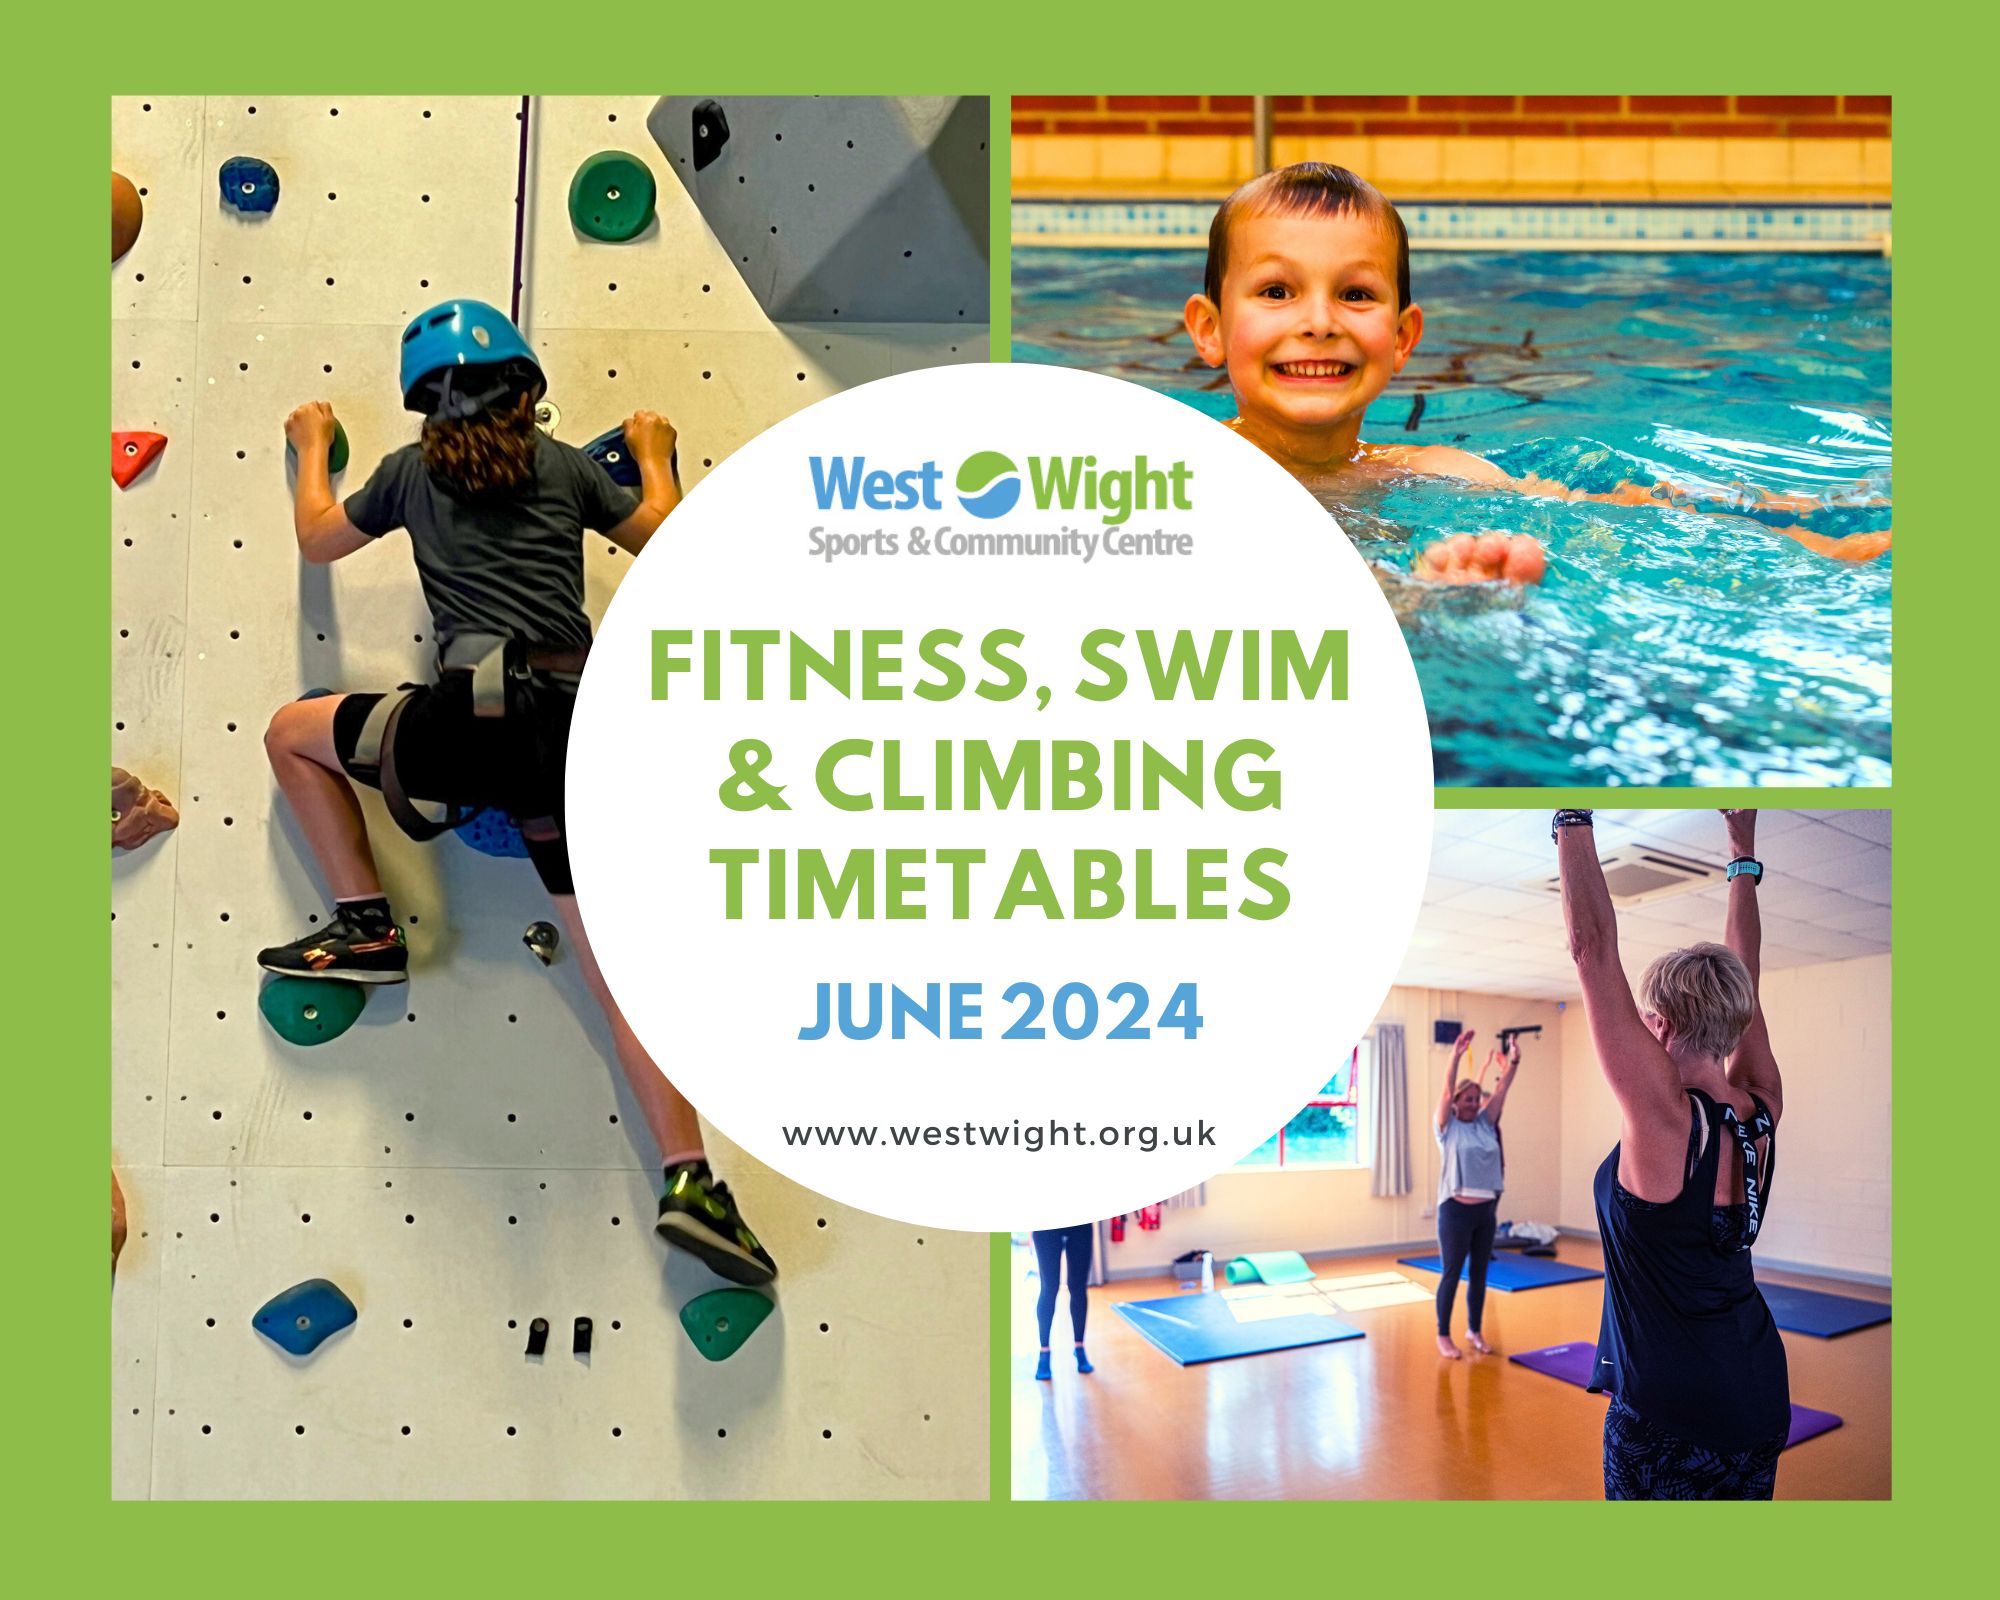 Picture of climbing, fun hour swim sessions and pilates class